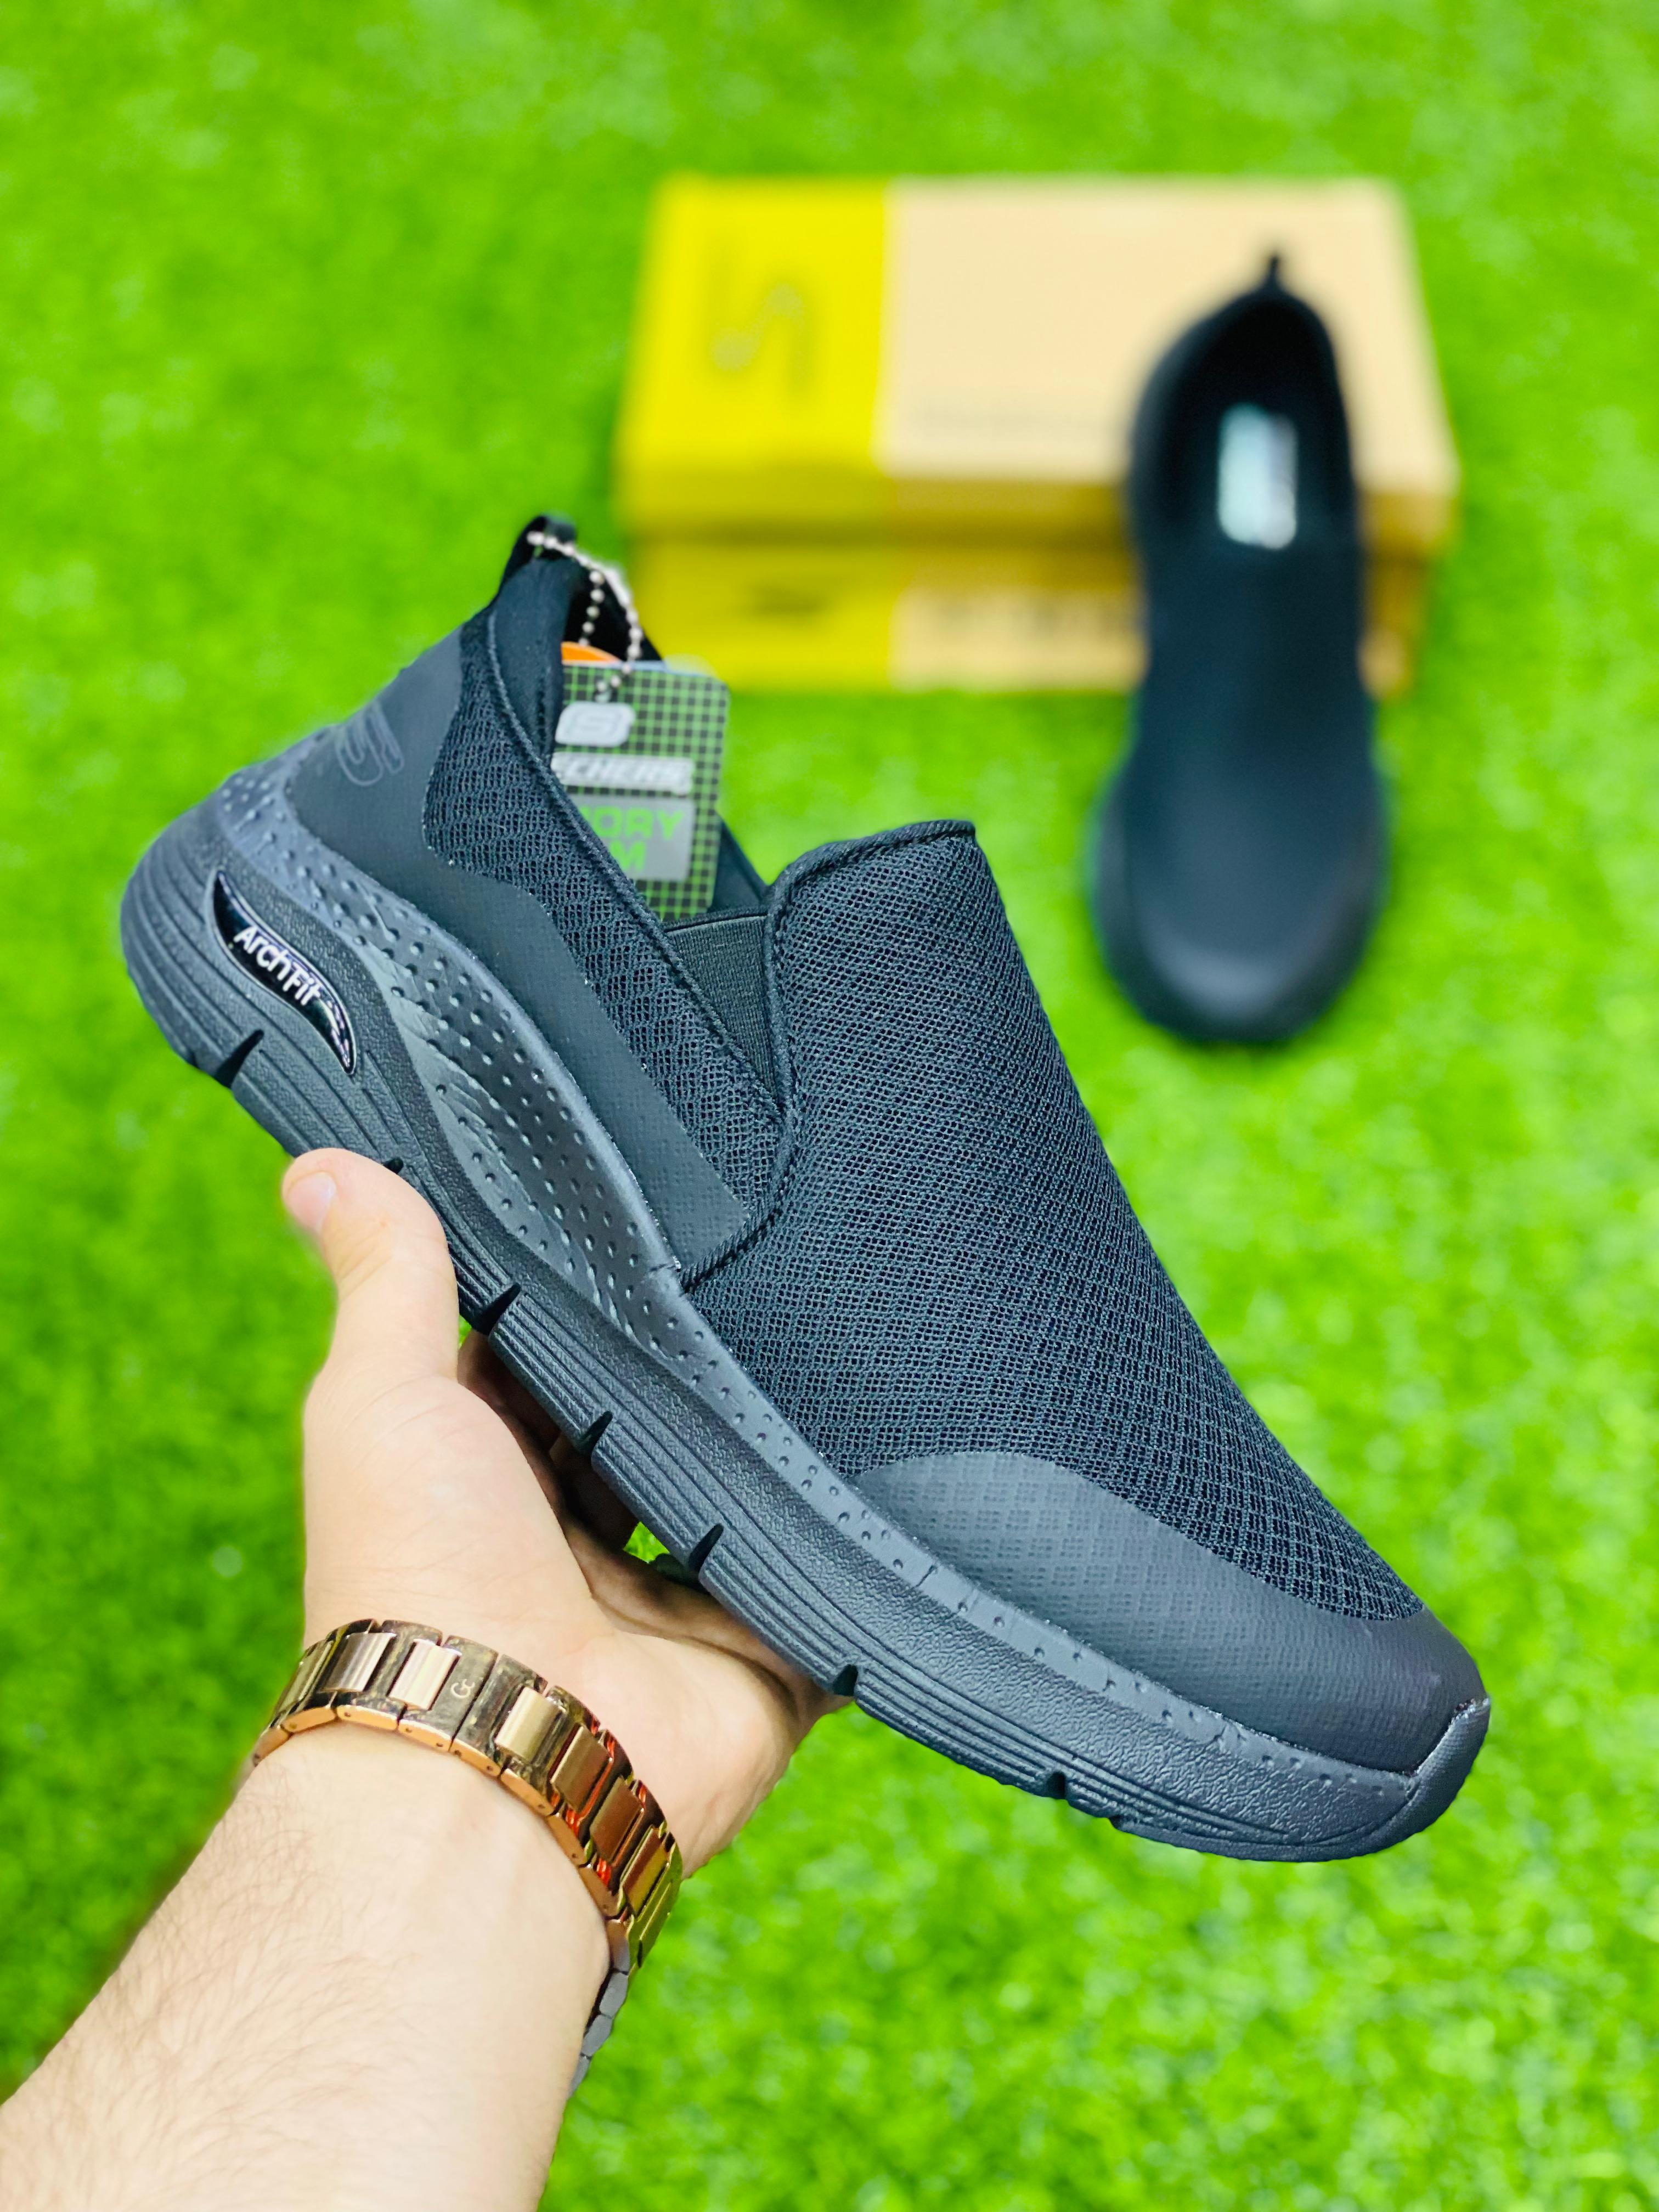 Skechers - Medicated - Archfit - All Black | Sneakfitters